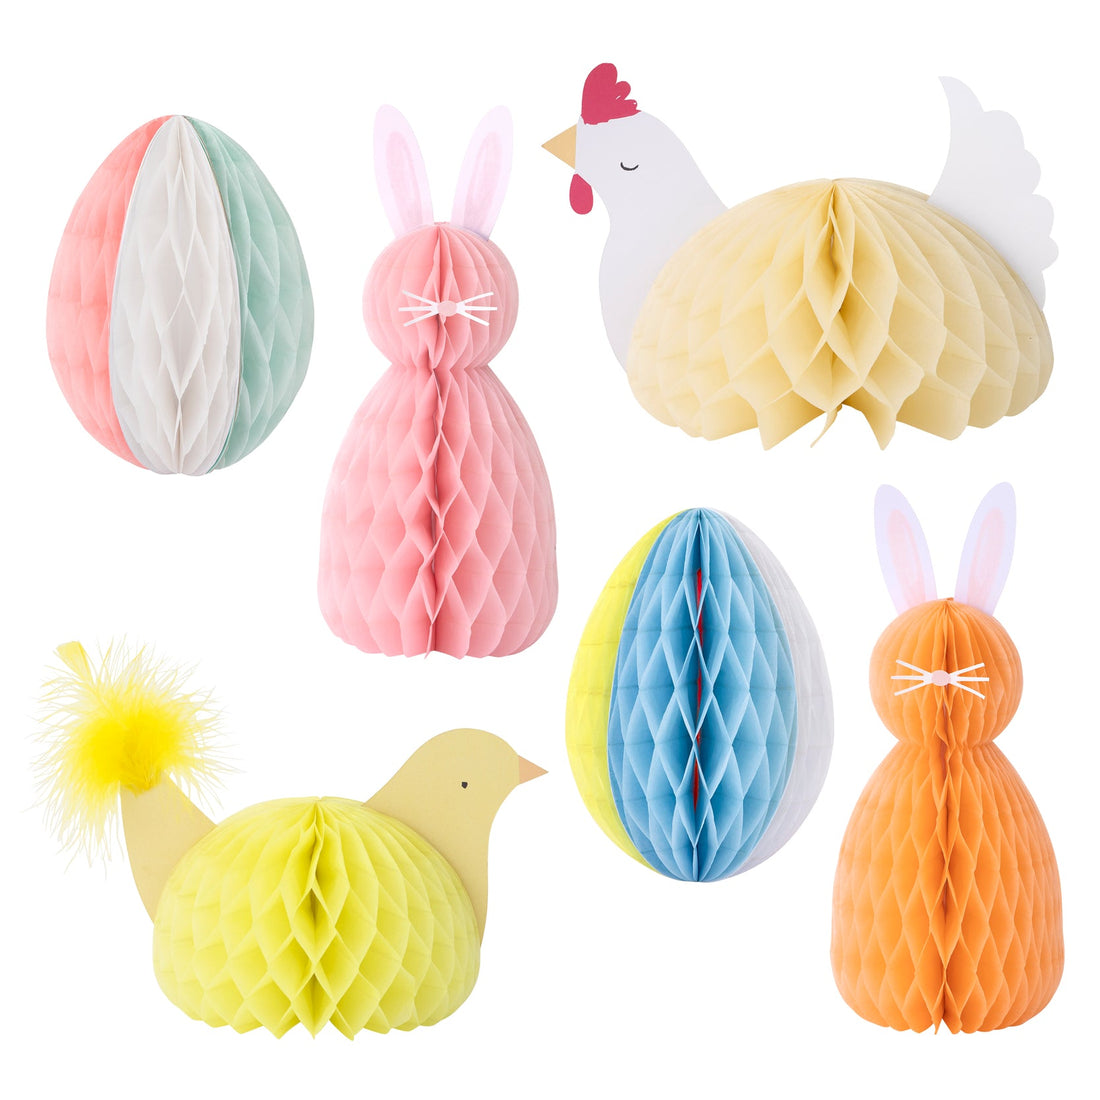 Easter Meri Meri honeycomb decorations, perfect for Easter parties and adding a festive touch to your party table.